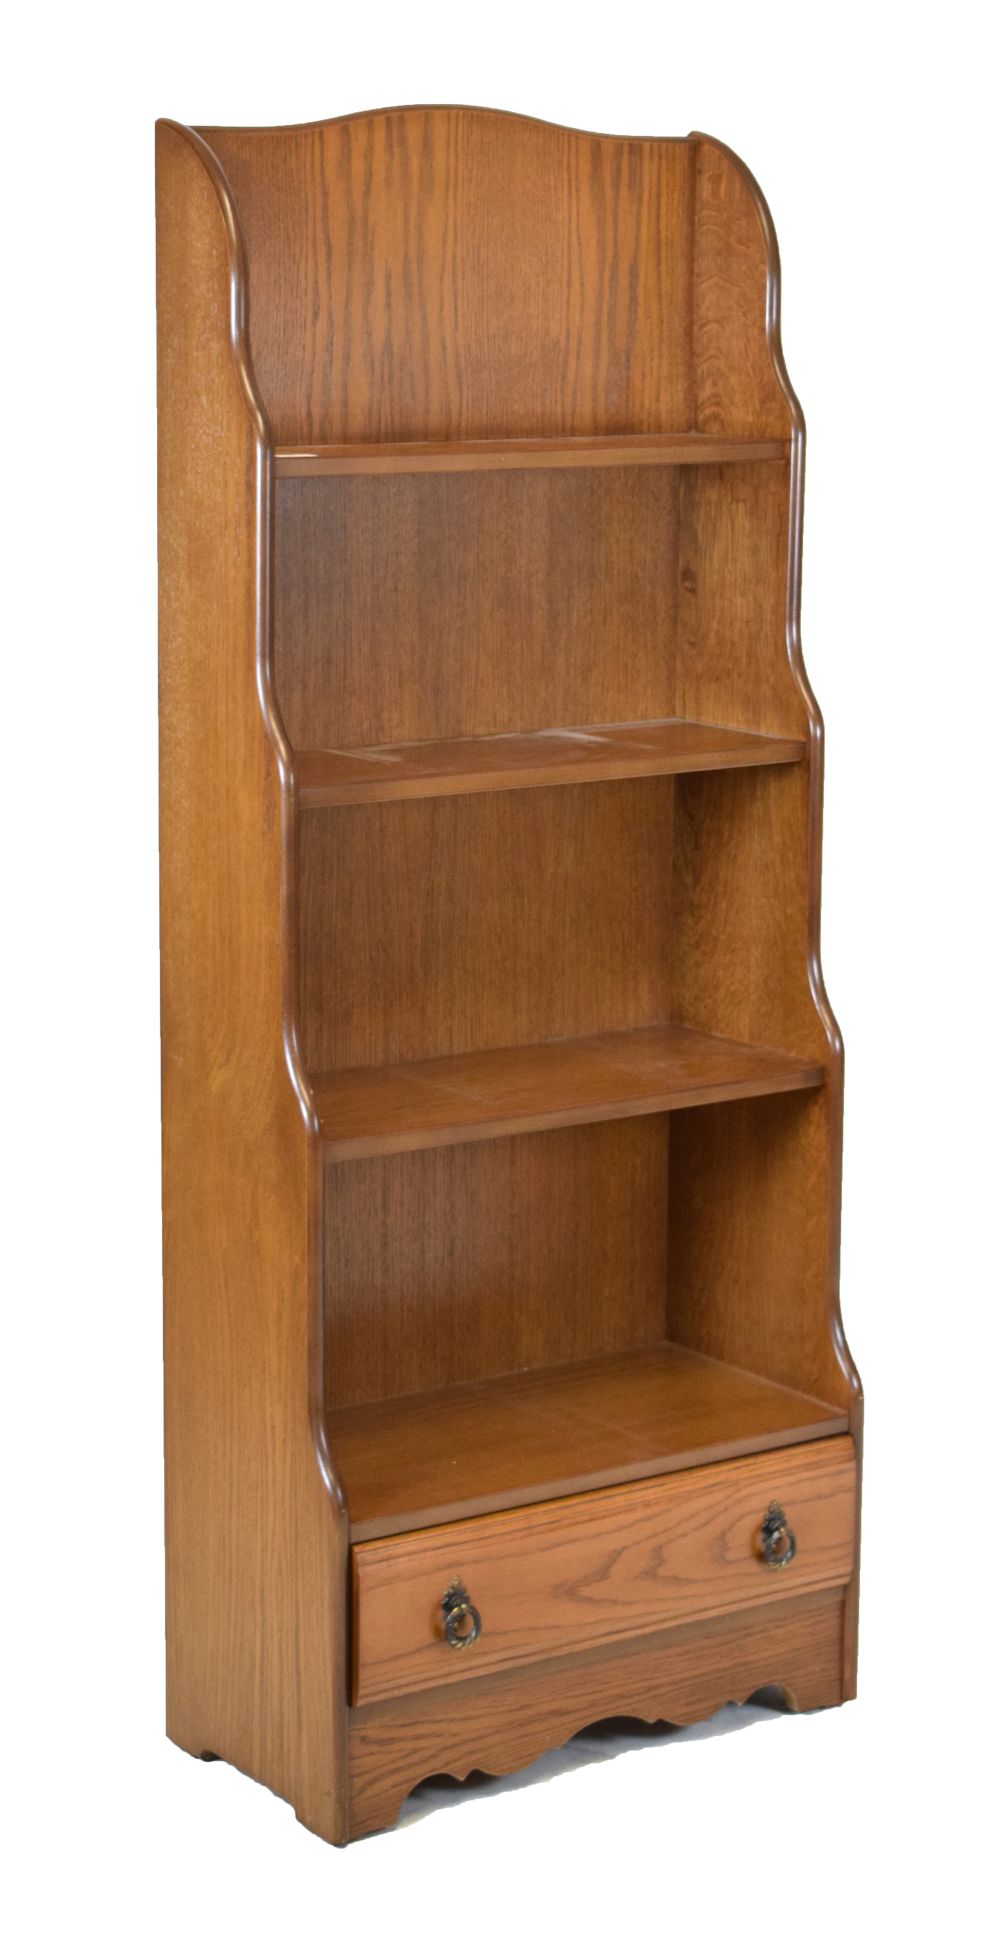 Grangemoor oak waterfall bookcase fitted one drawer to base, 61.5cm x 30cm x 153cm high Condition: